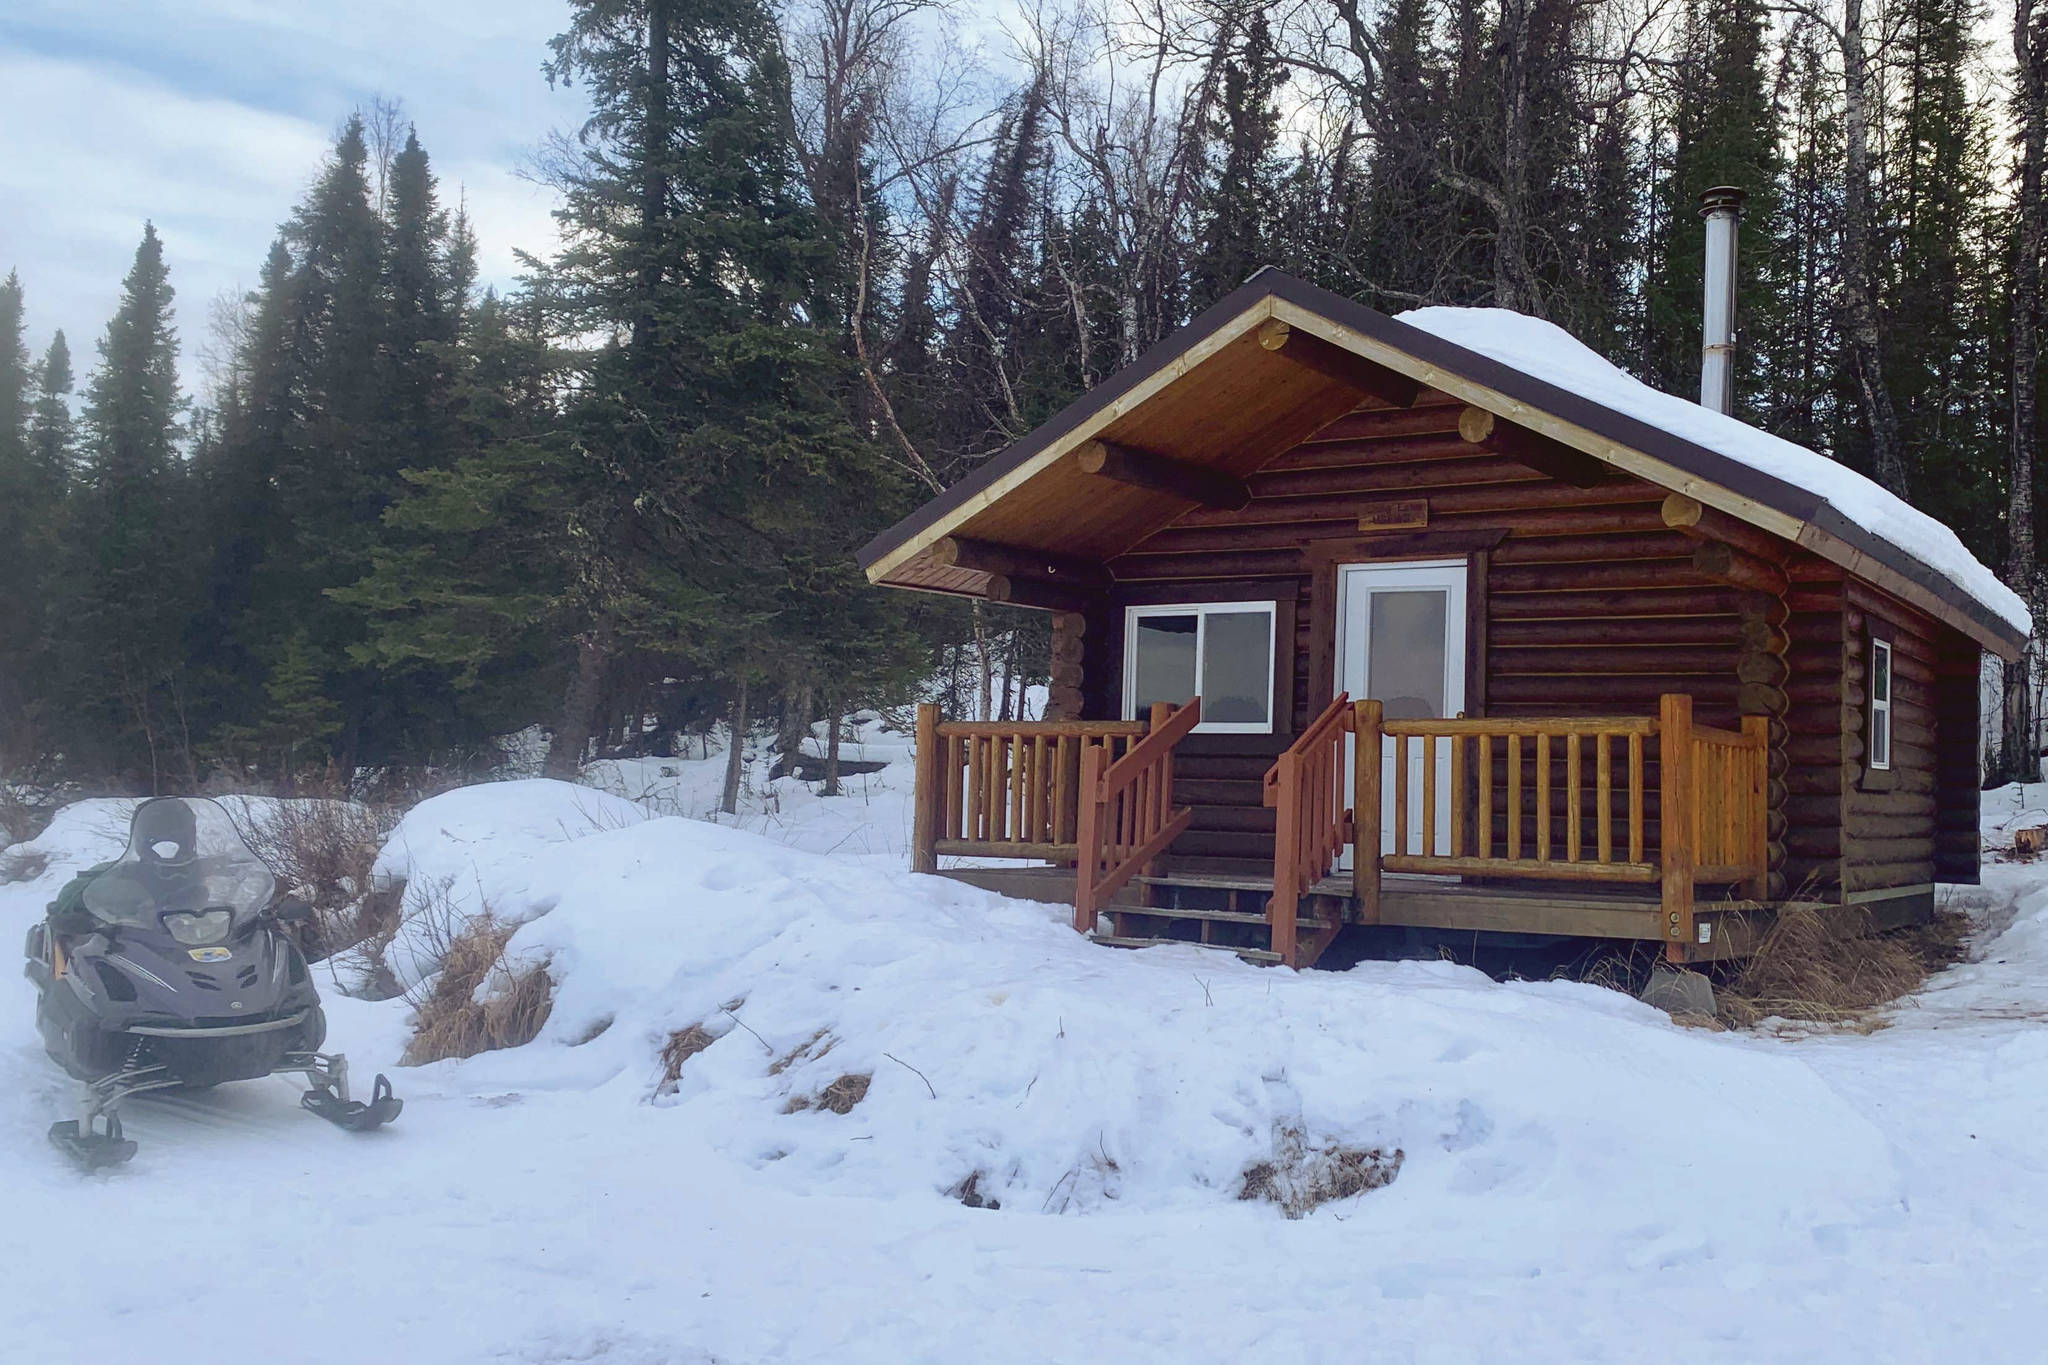 A snowmachine at rest in front of the Snag Lake public use cabin. (Photo provided by USFWS)